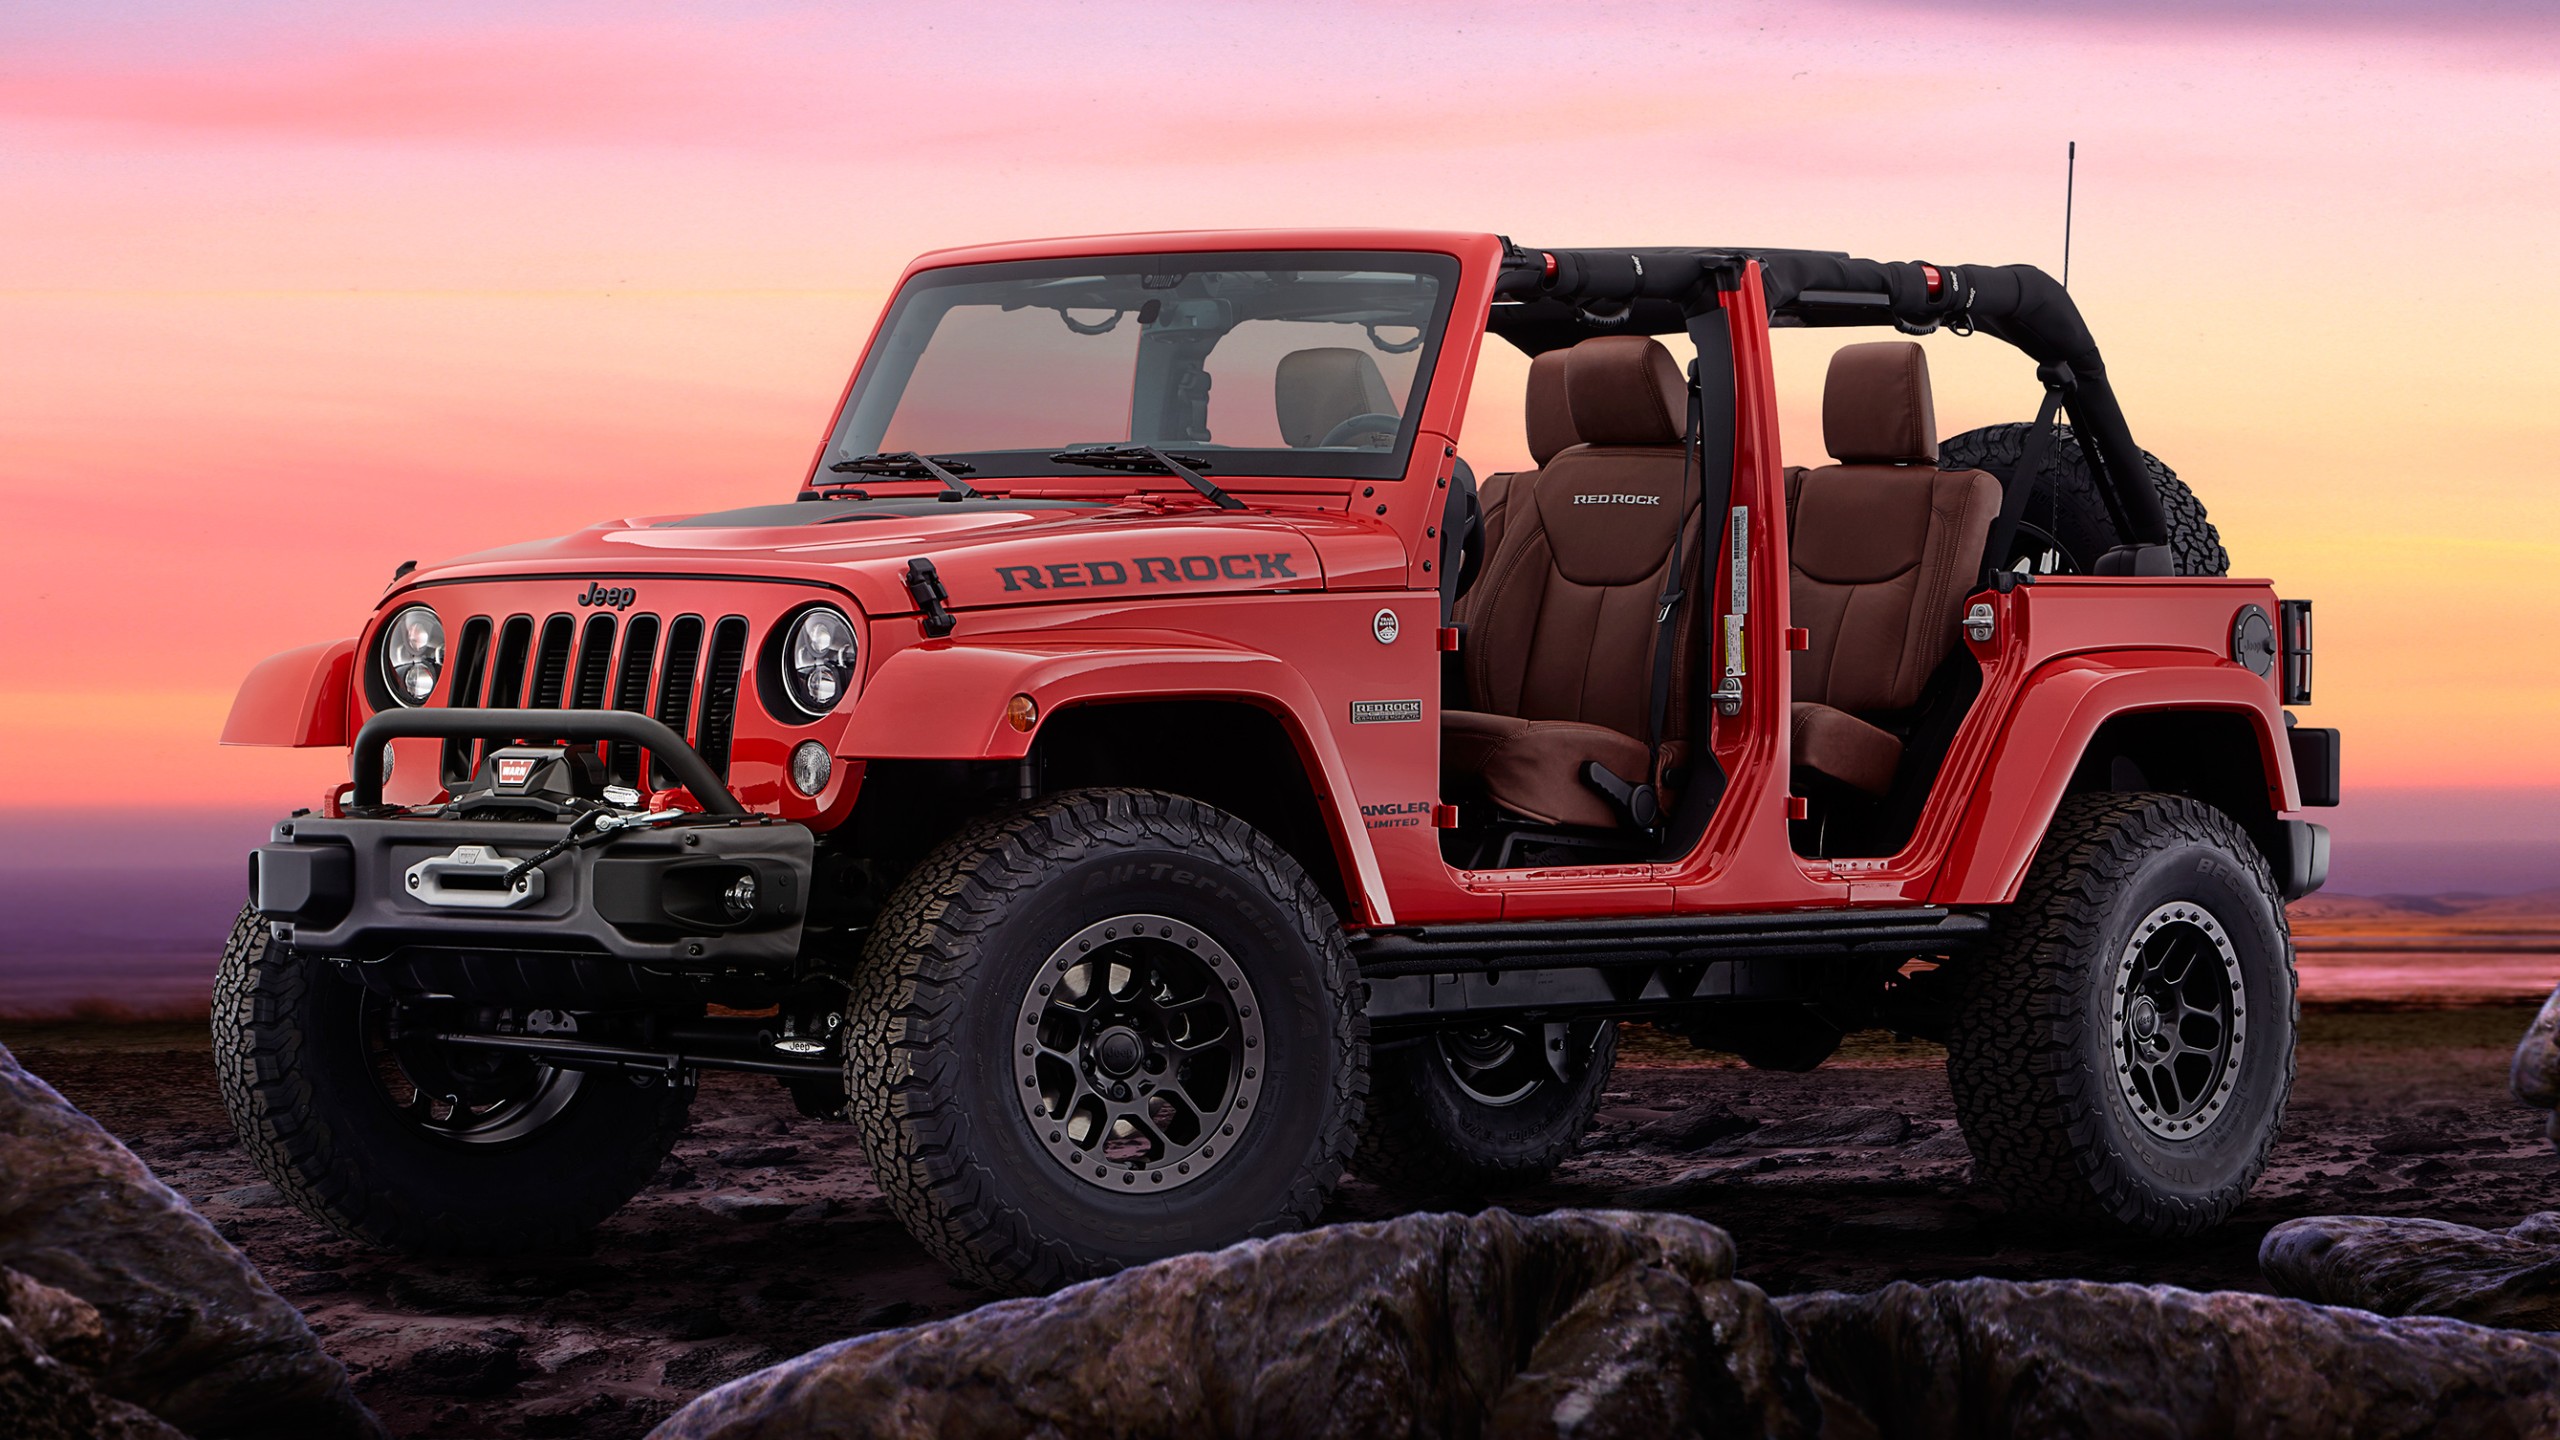 2017 Jeep Wrangler Red Rock Edition Wallpaper Hd Car Wallpapers Id 7696